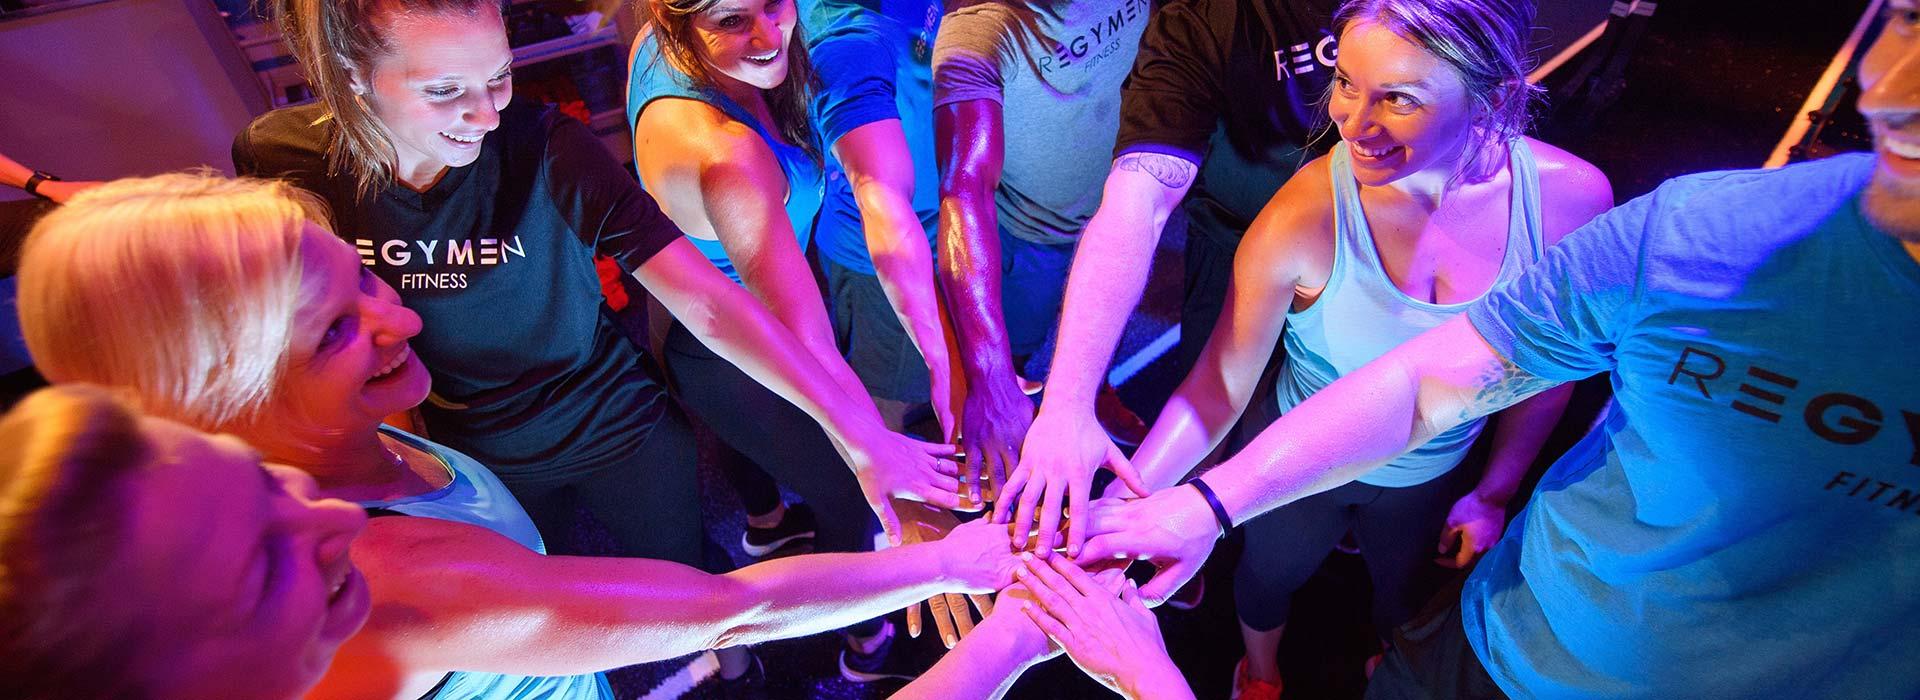 A group of people putting hands in showing team spirit